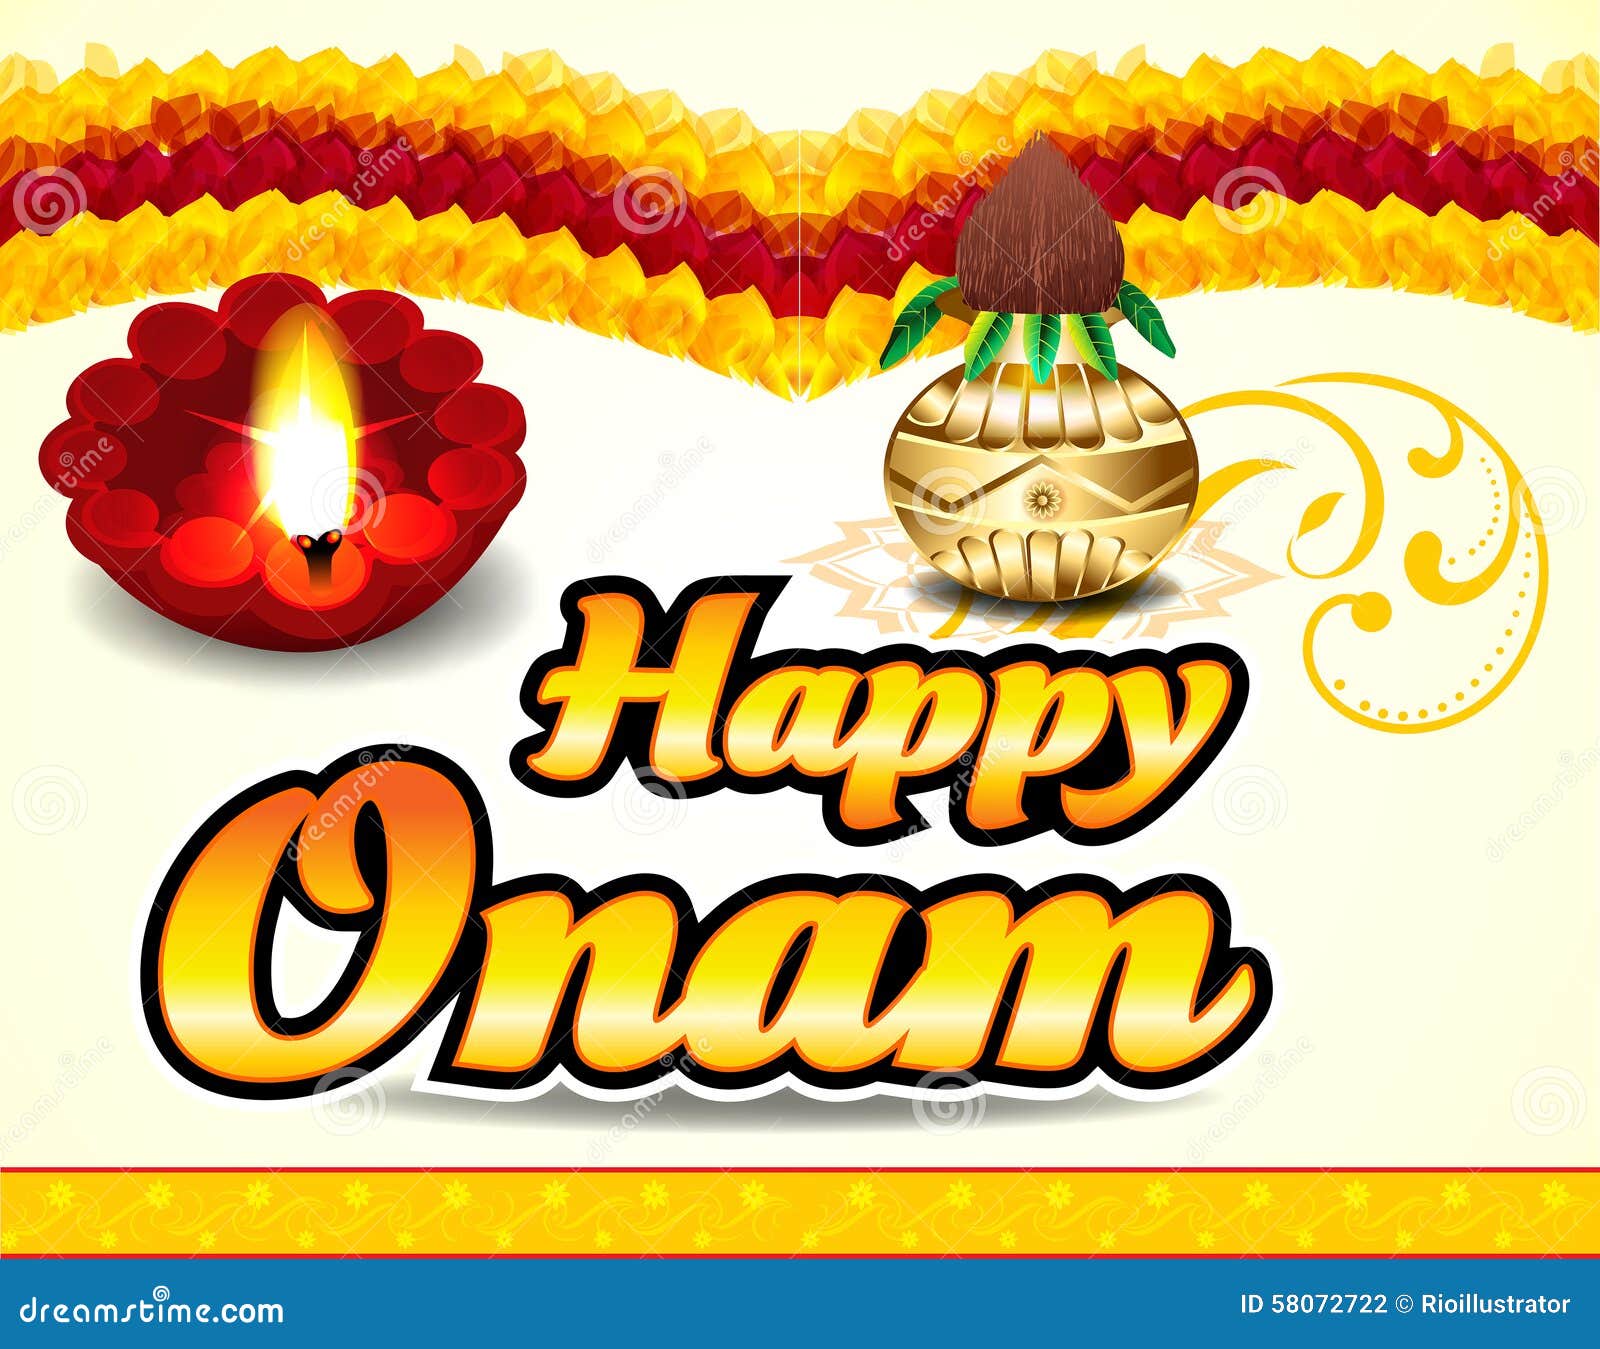 Vector design of happy onam festival background of kerala south india in  indian art style  CanStock